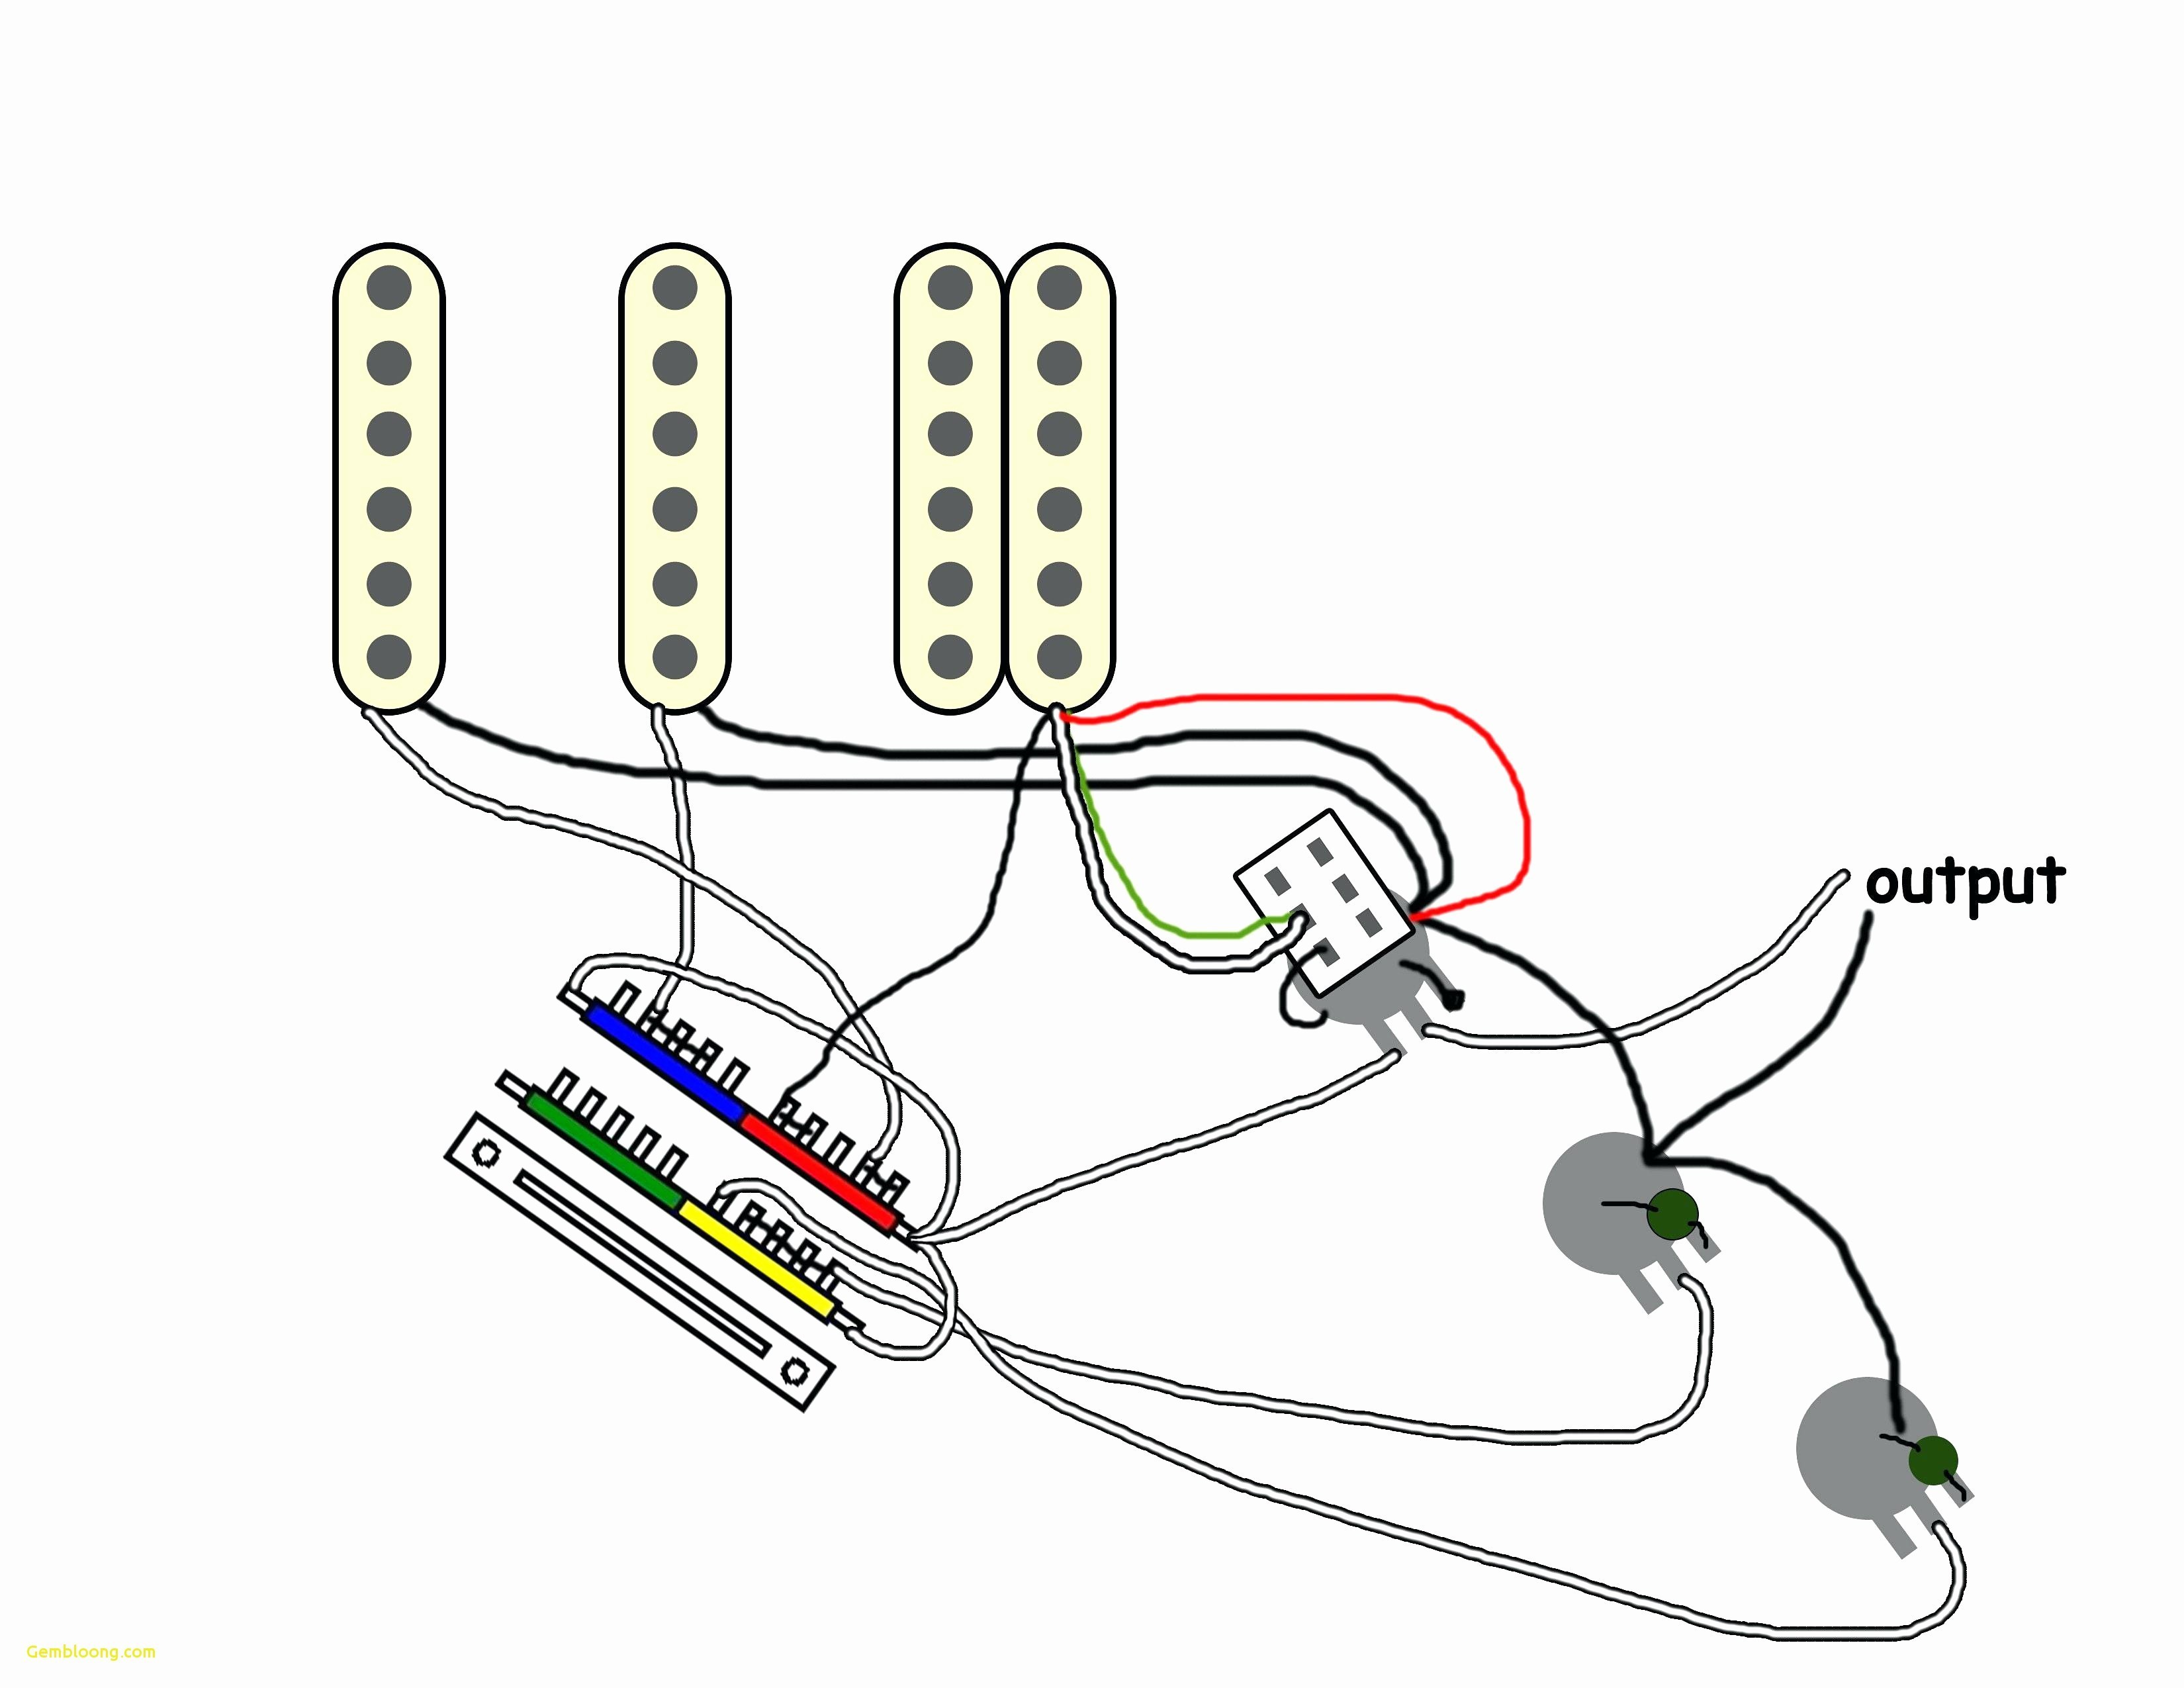 Wiring Diagram for Fender Stratocaster 5 Way Switch Best Wiring Diagram for 5 Way Guitar Switch